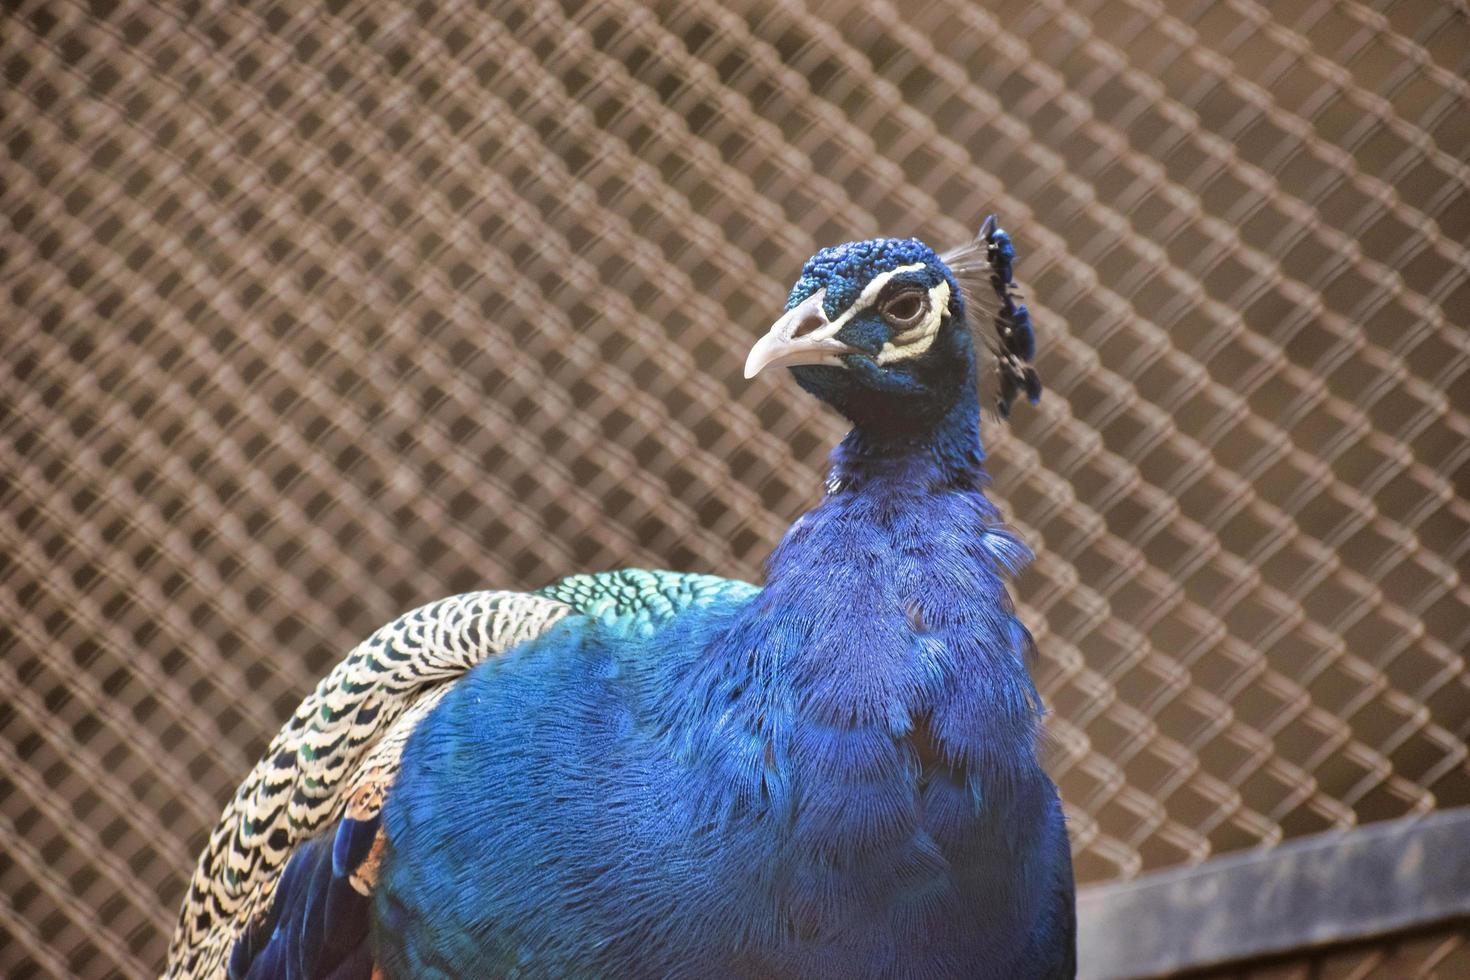 The Indian peafowl, also known as the common peafowl, and blue peafowl. photo